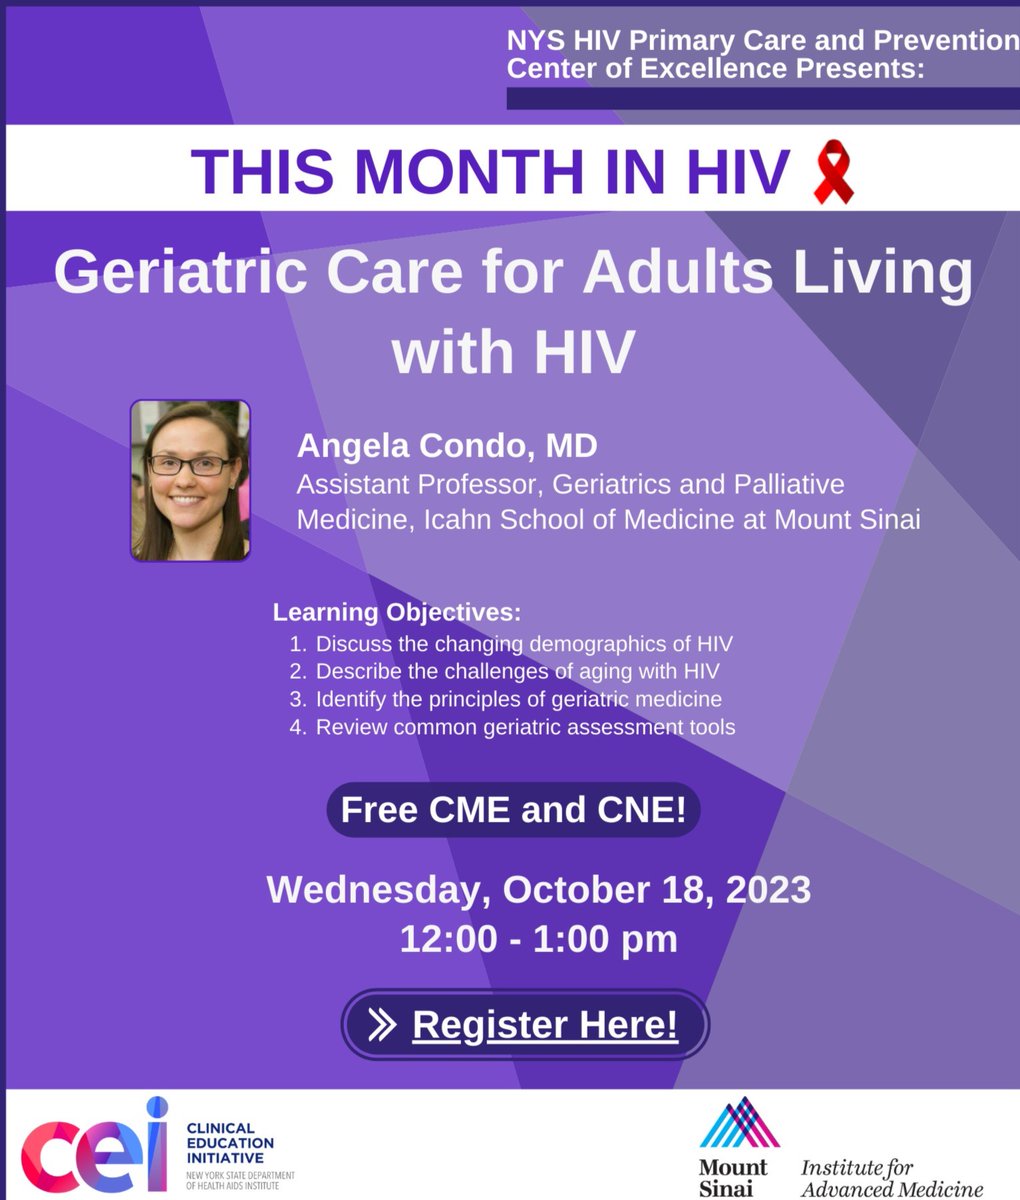 Please join us for our webinar 'Geriatric Care for Adults Living with HIV' on October 18th at 12pm. bit.ly/48QbPk4